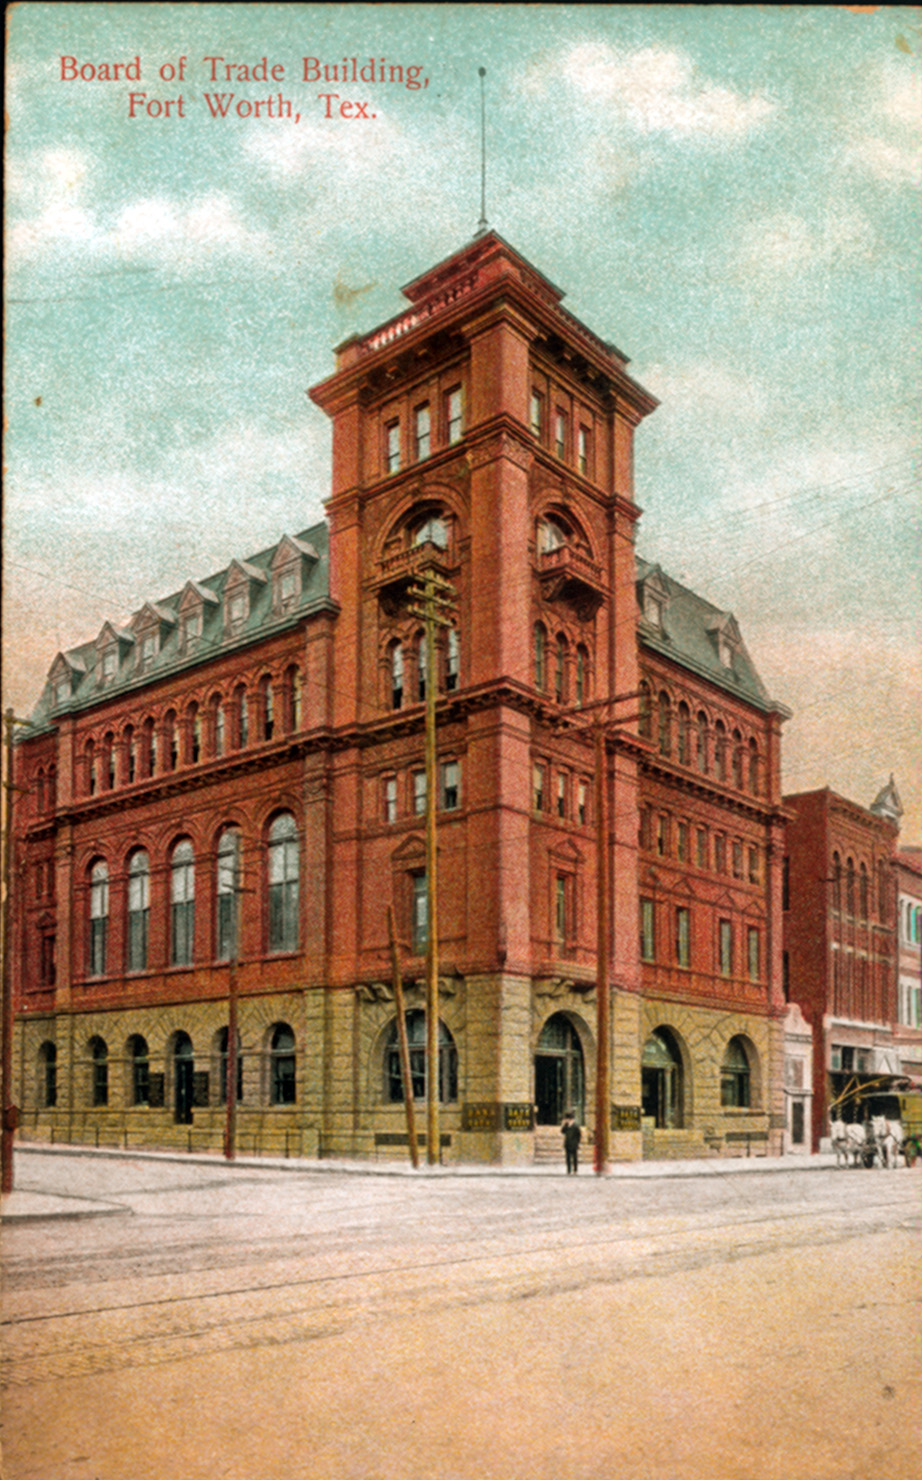 Postcard of the Board of Trade Building in Fort Worth, 1909